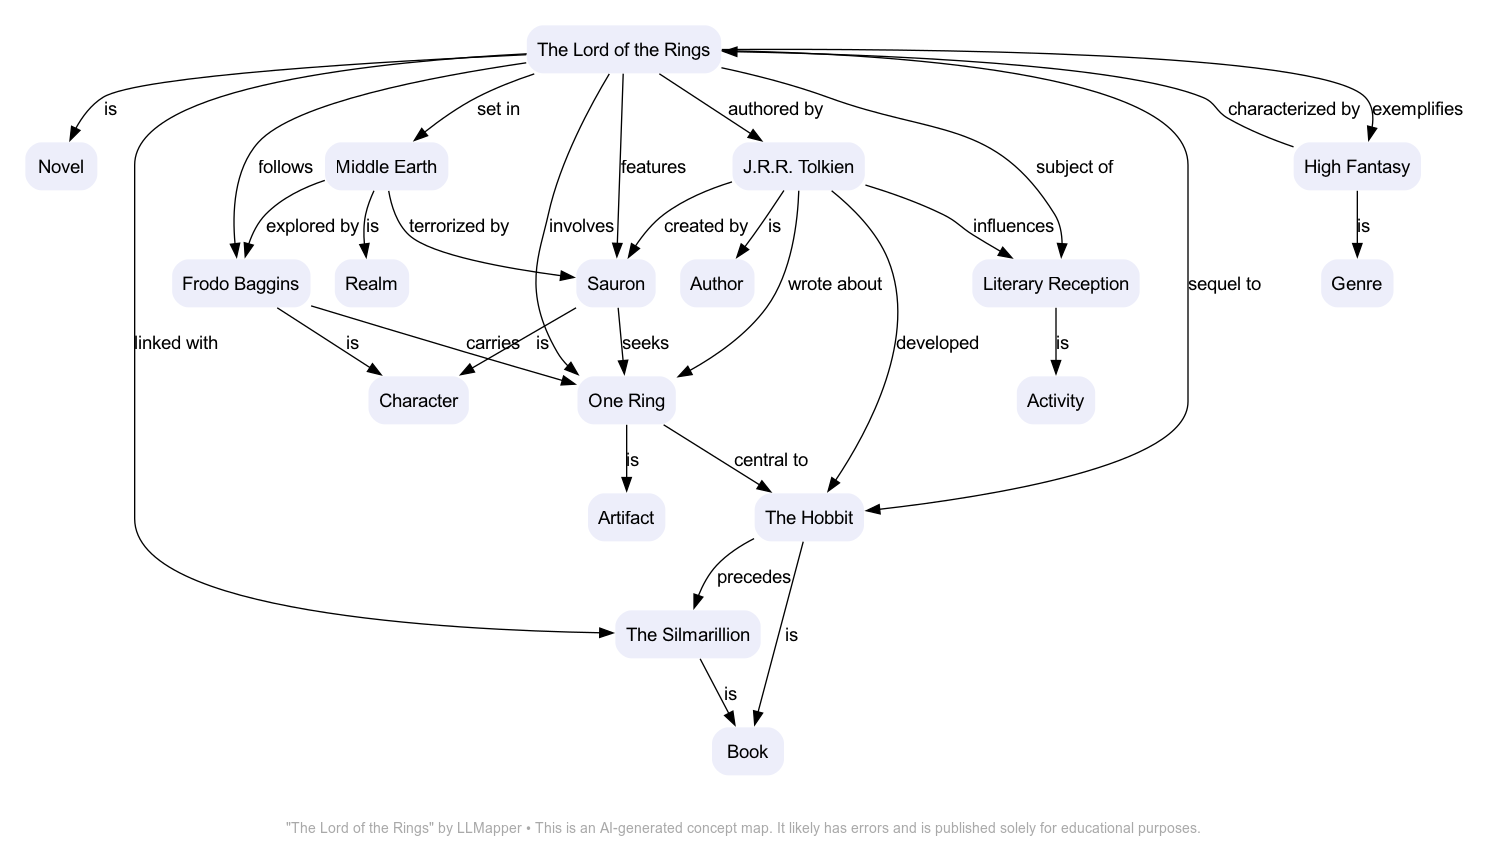 The Lord of the Rings concept map